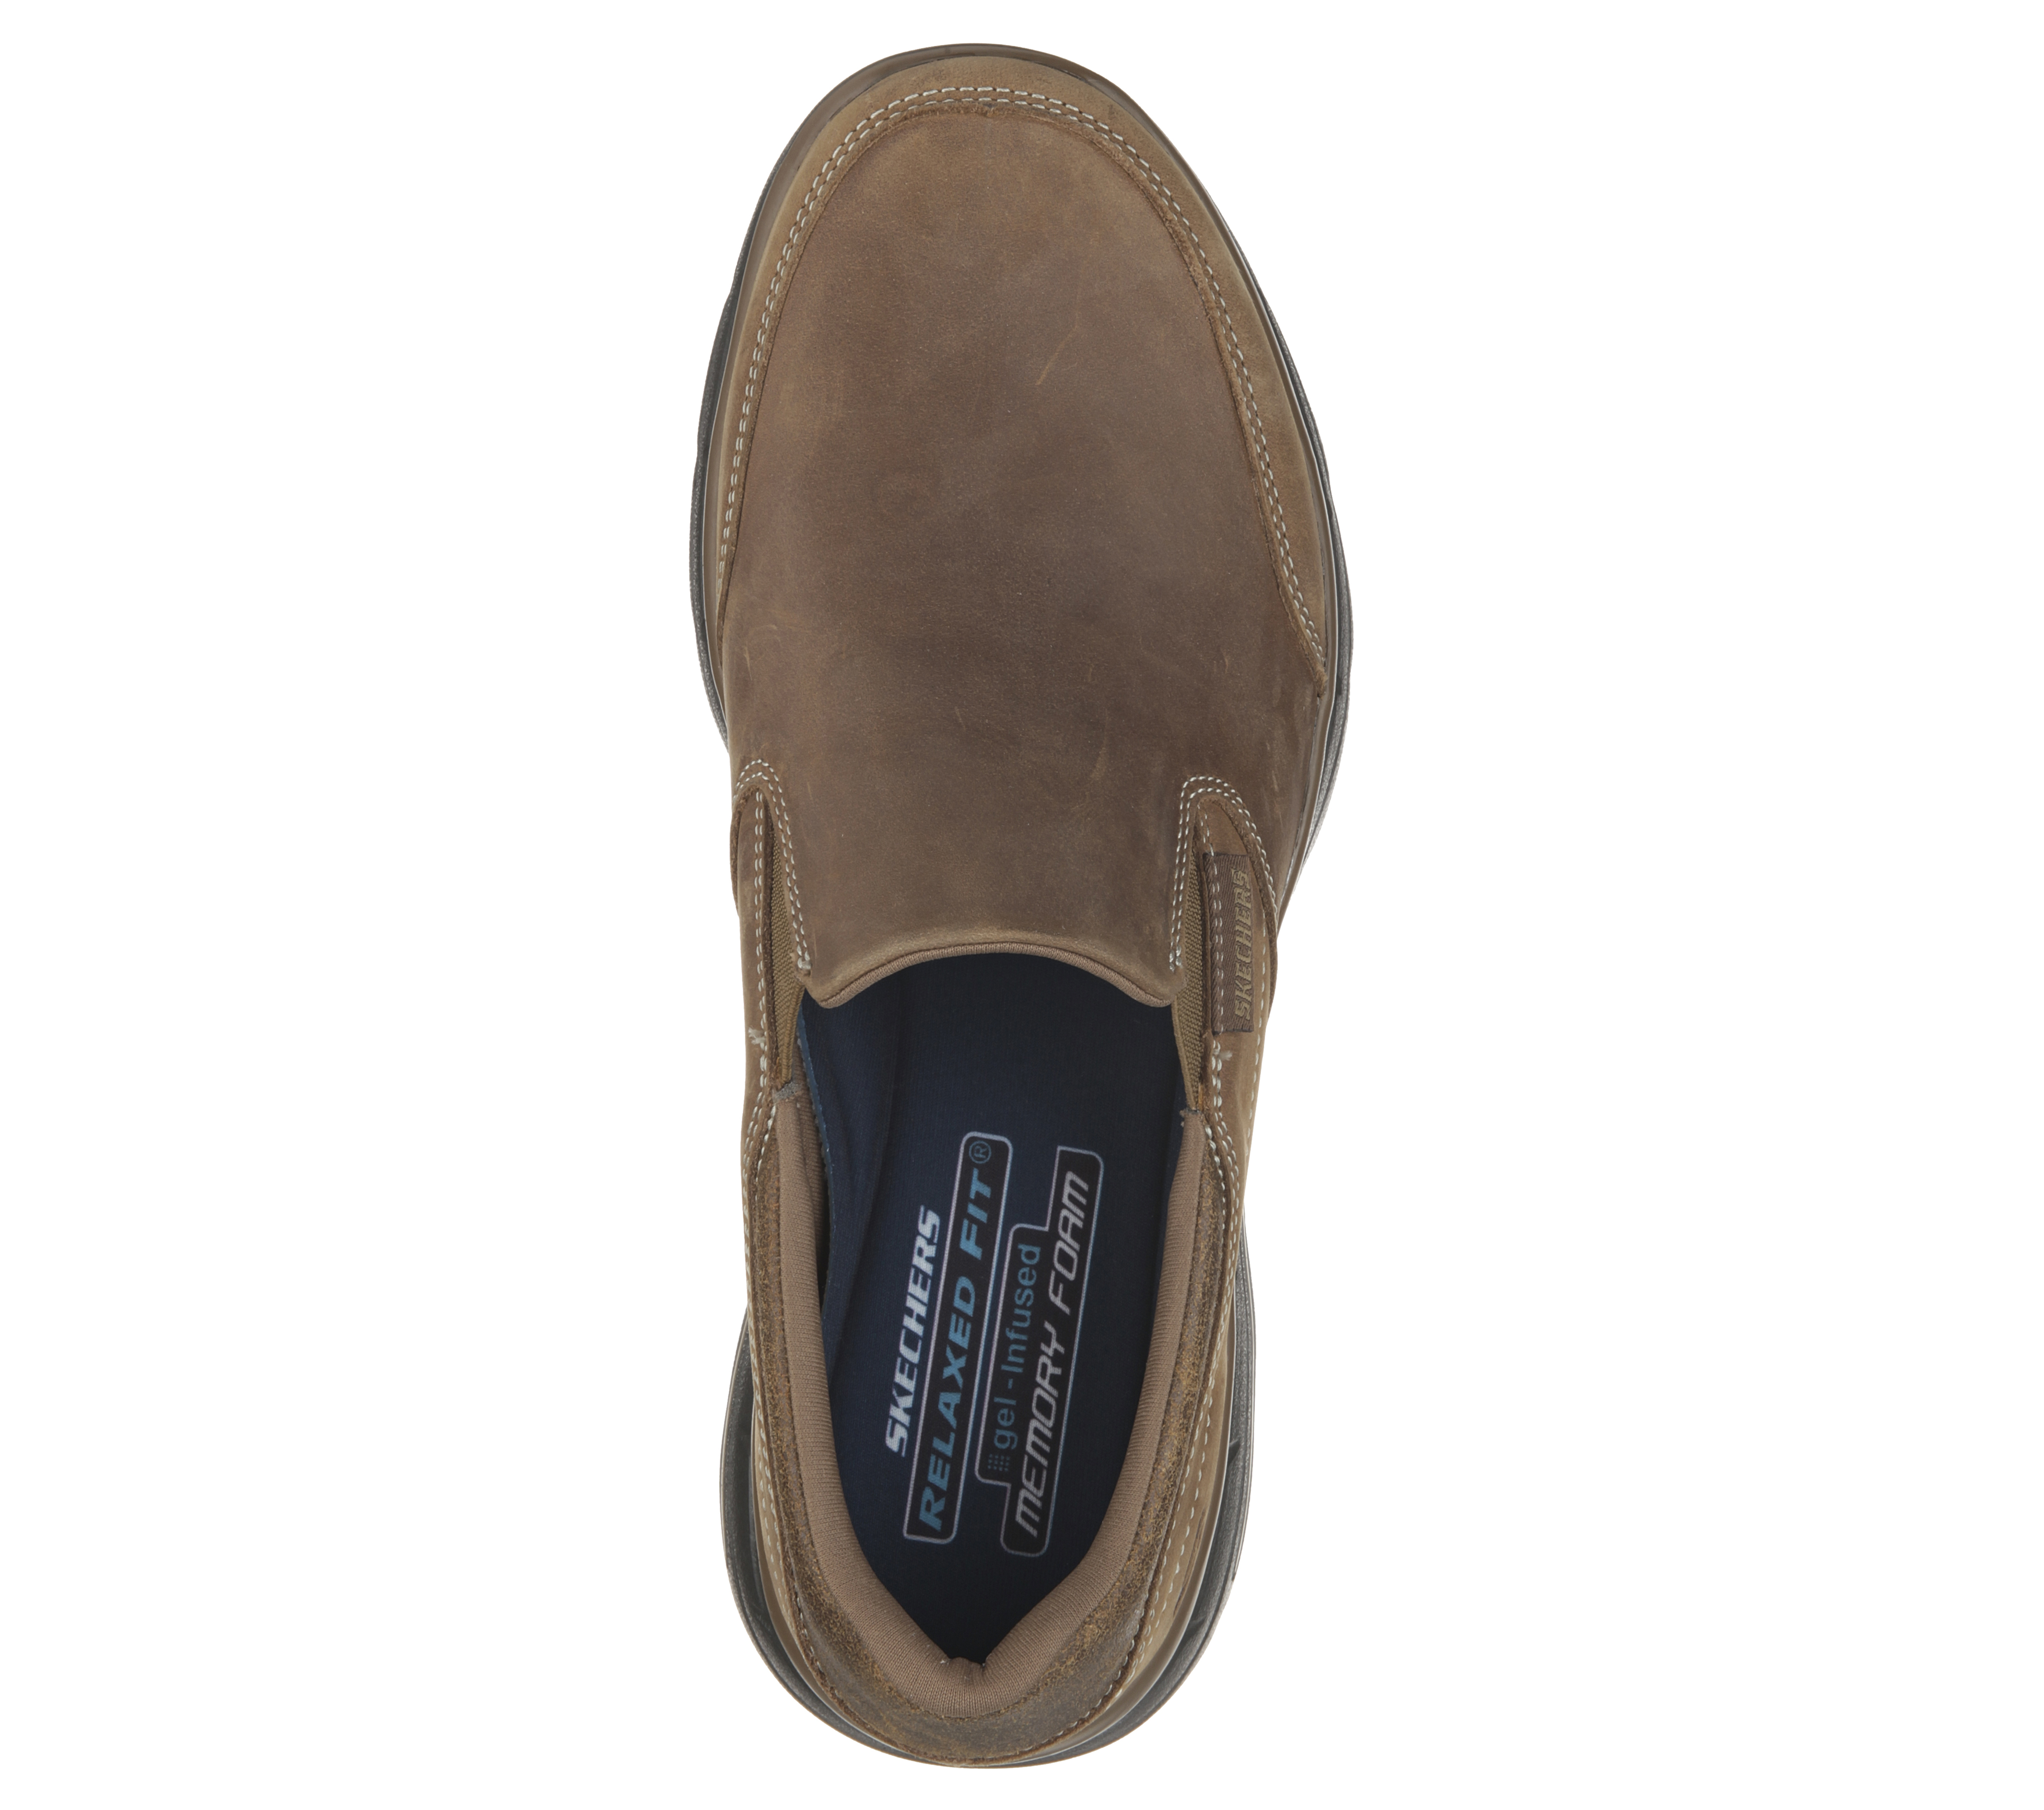 skechers relaxed fit glides calculous slip on